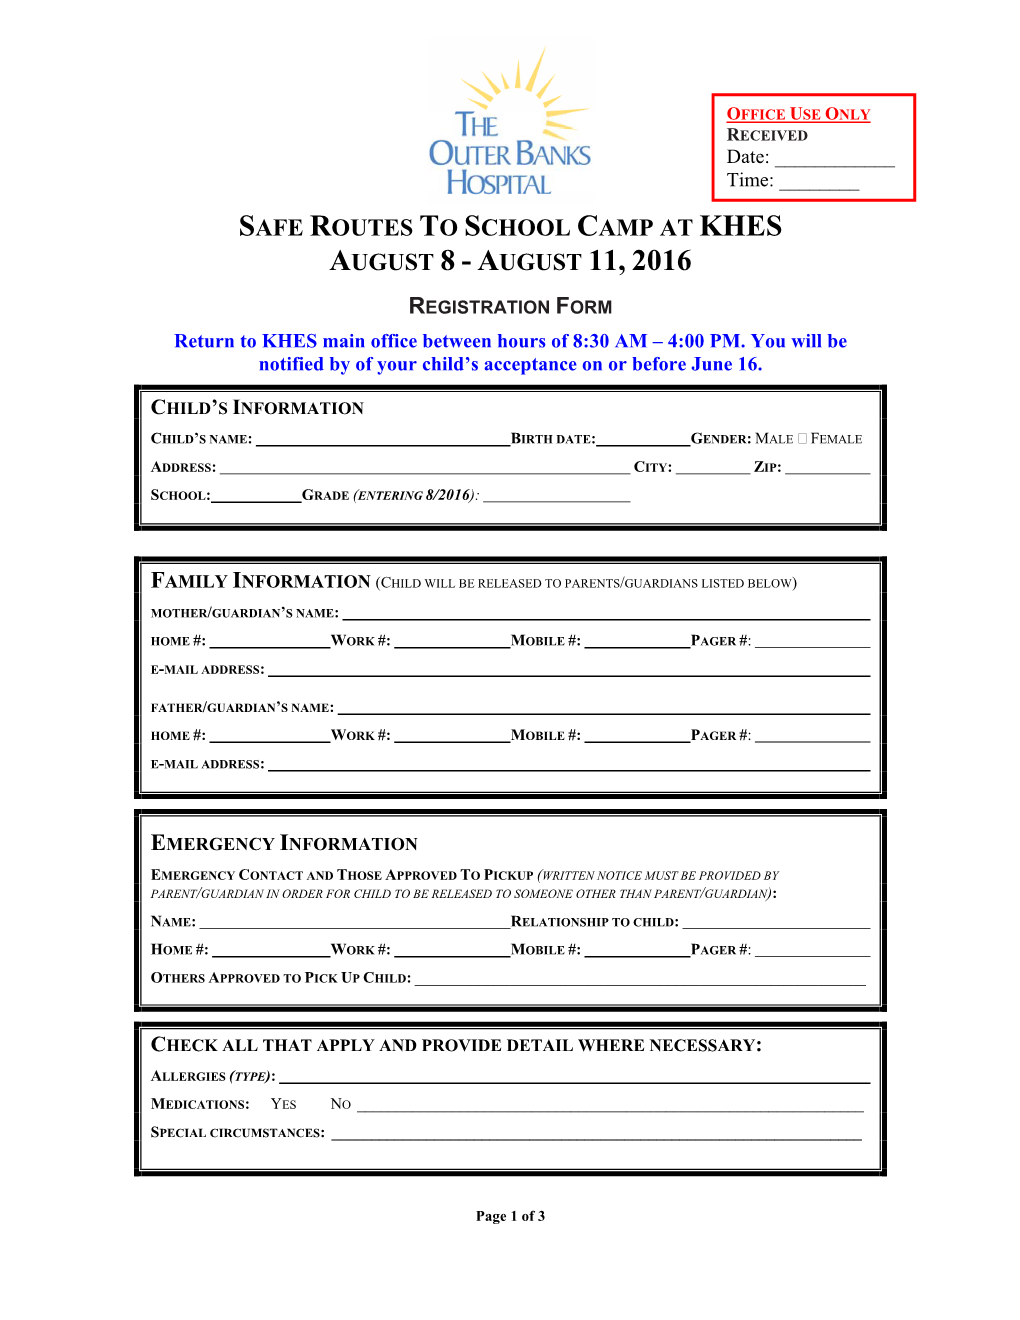 REGISTRATION FORM Return to KHES Main Office Between Hours of 8:30 AM – 4:00 PM